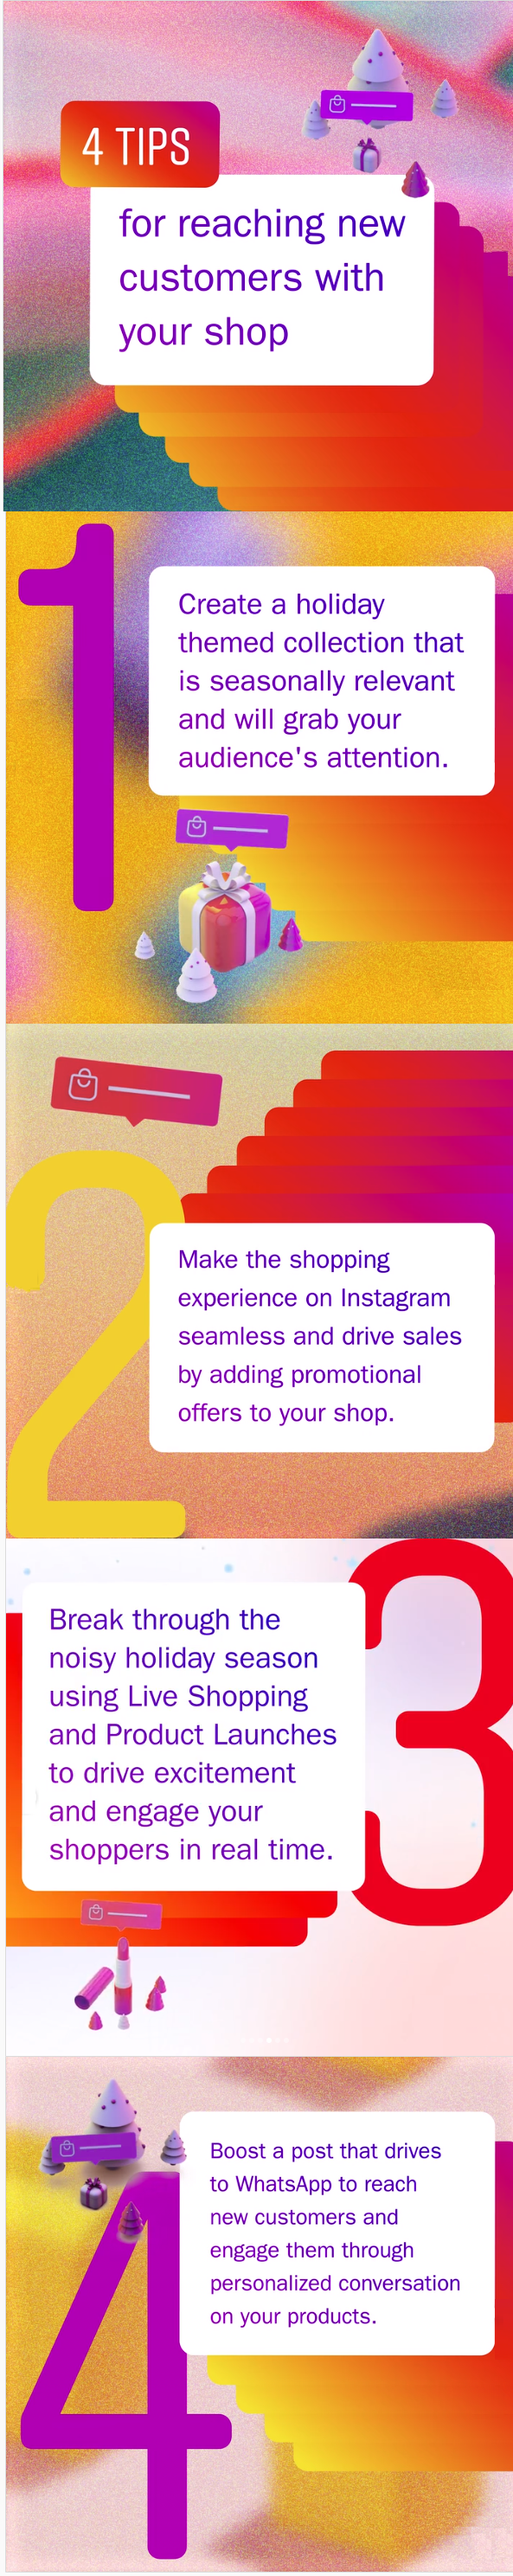 4 tips for reaching new customers with your instagram shop infographic